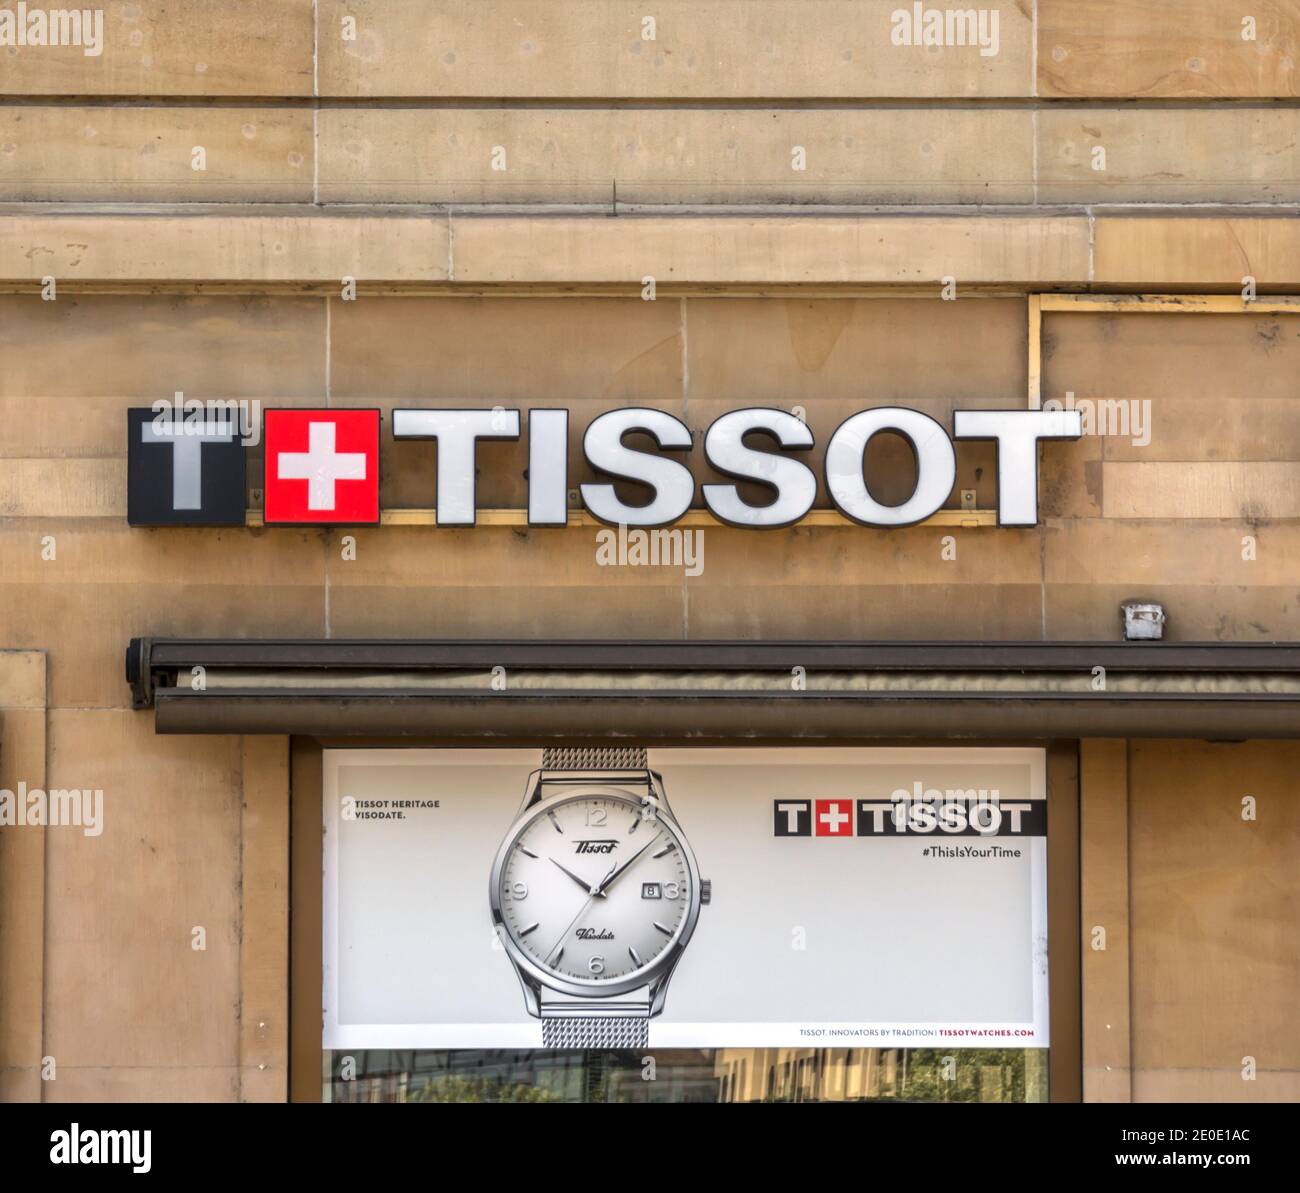 Tissot logo on their jewelry boutique in Basel. Tissot is a Swiss luxury watchmaker famous for chronographs and watches. Stock Photo